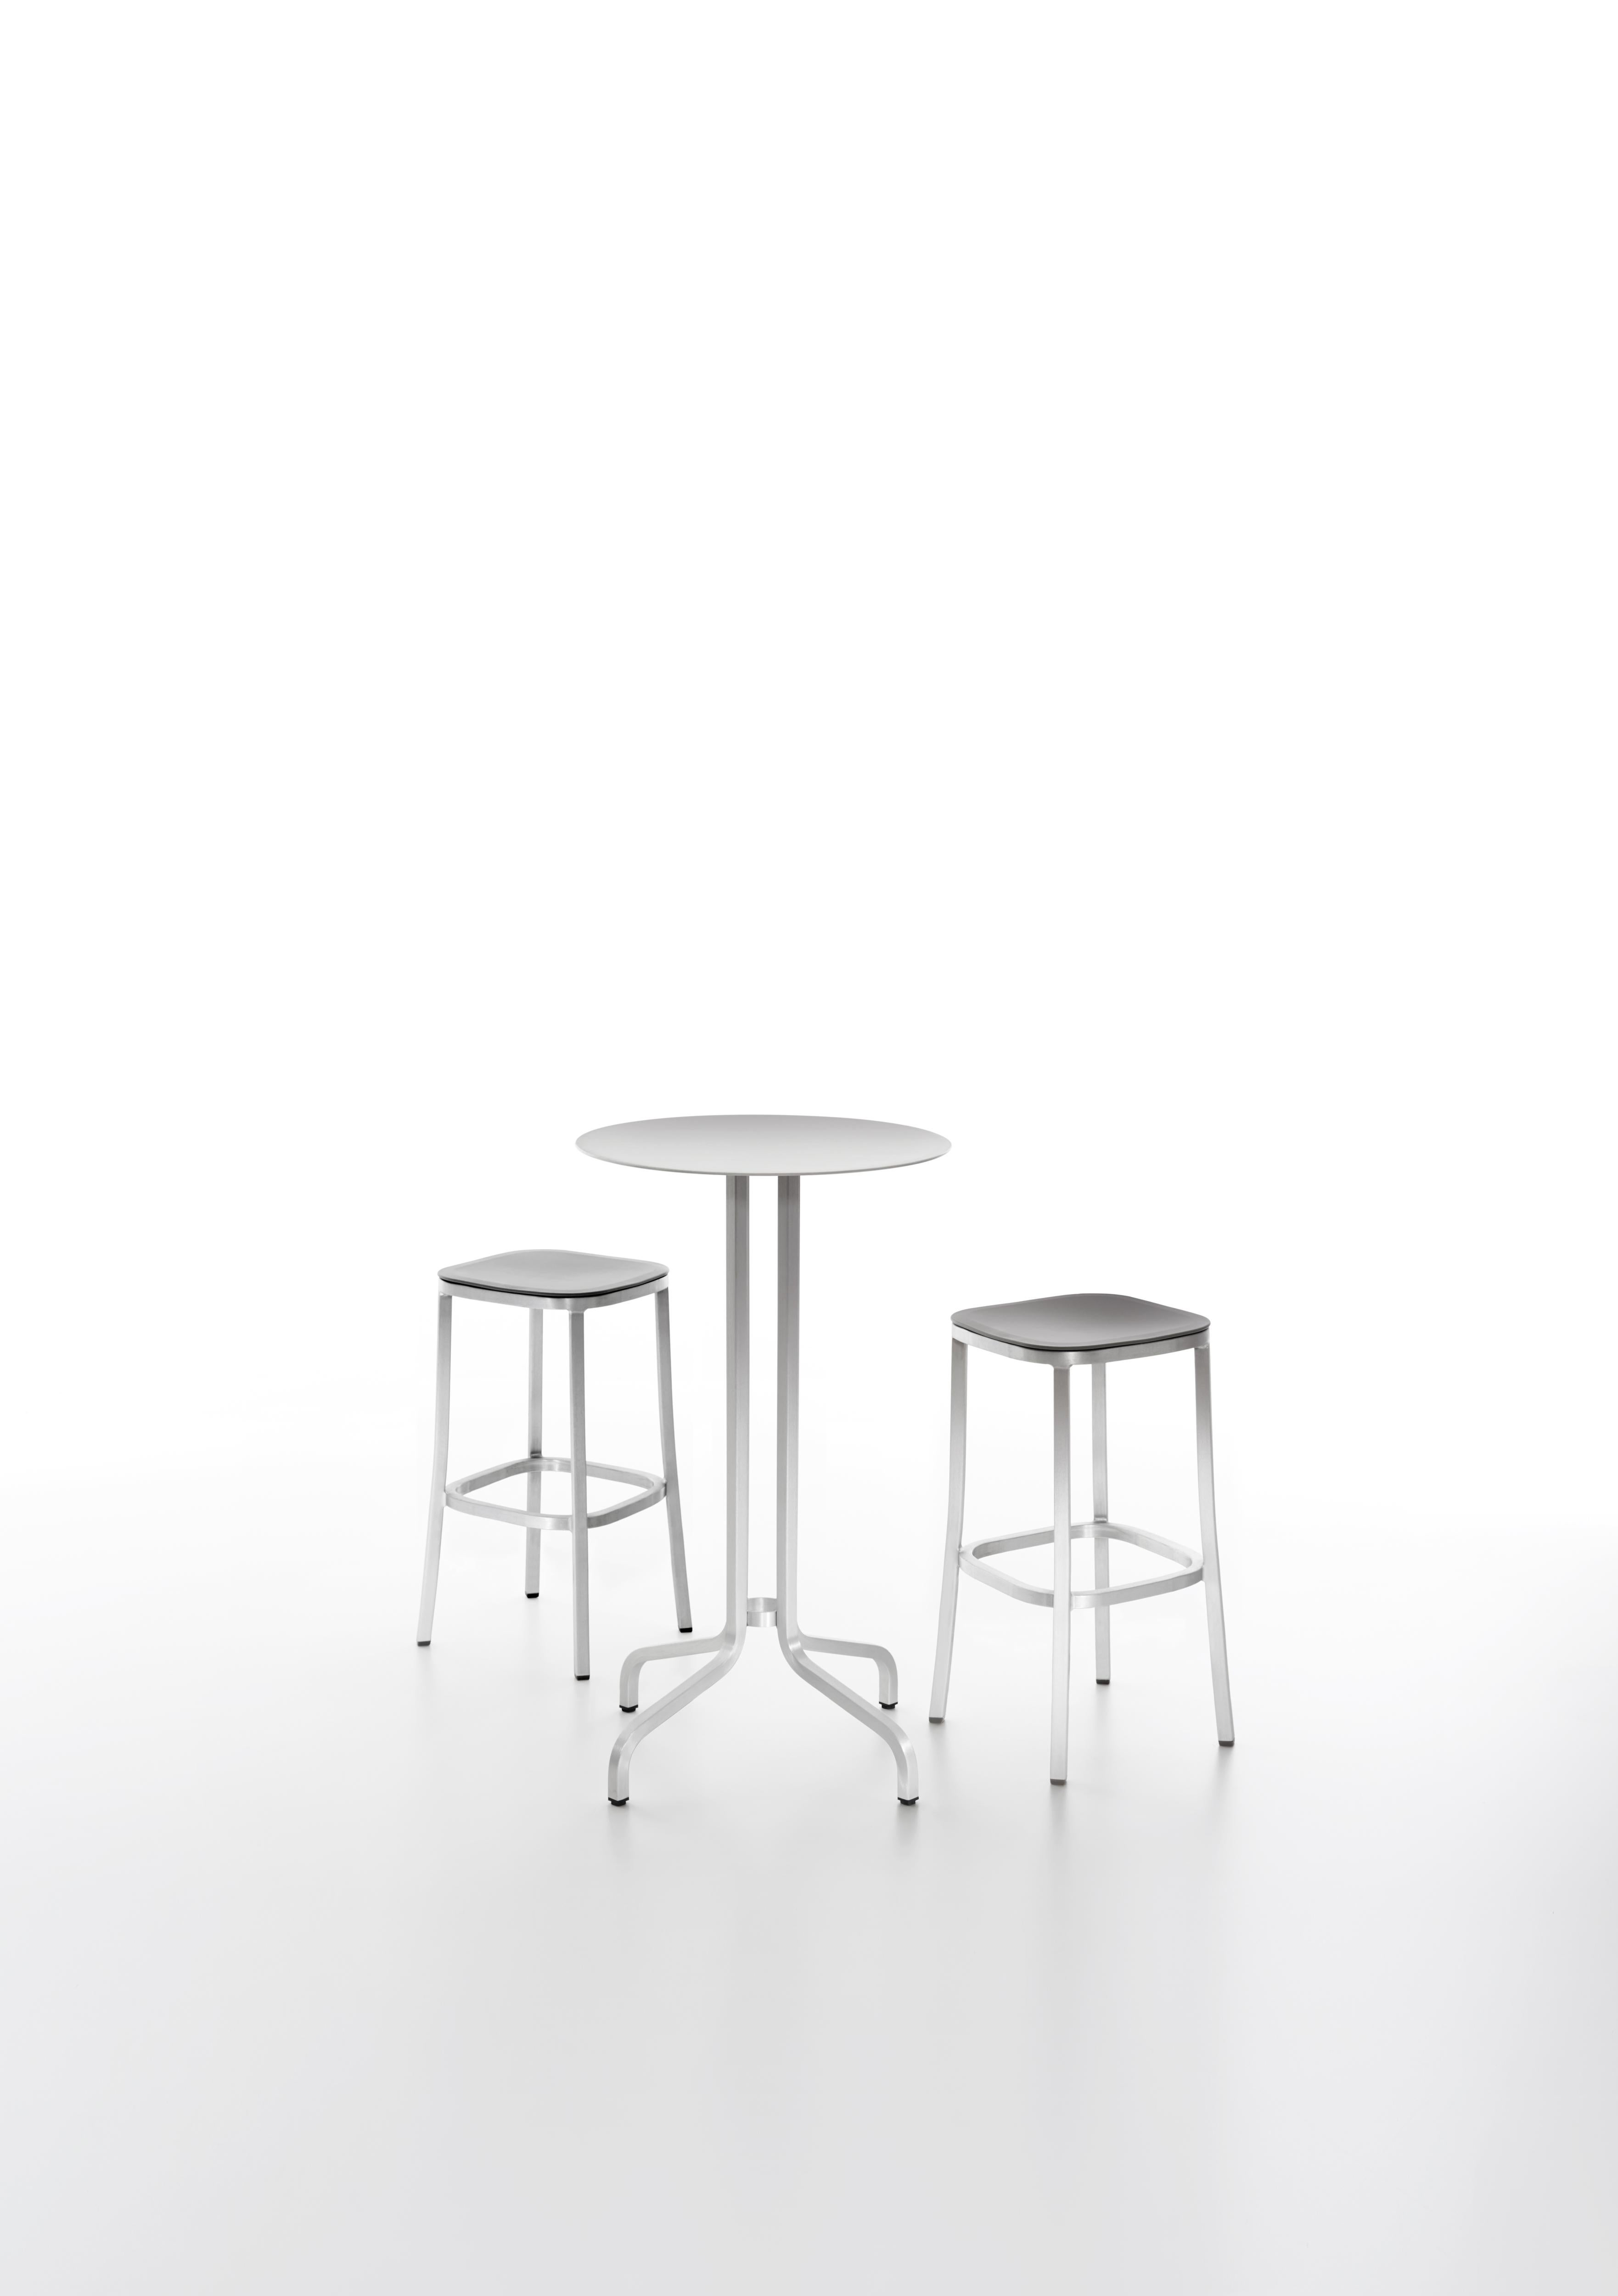 Emeco 1 Inch Barstool in Dark Powder-Coated Aluminium & Brown by Jasper Morrison In New Condition For Sale In Hanover, PA